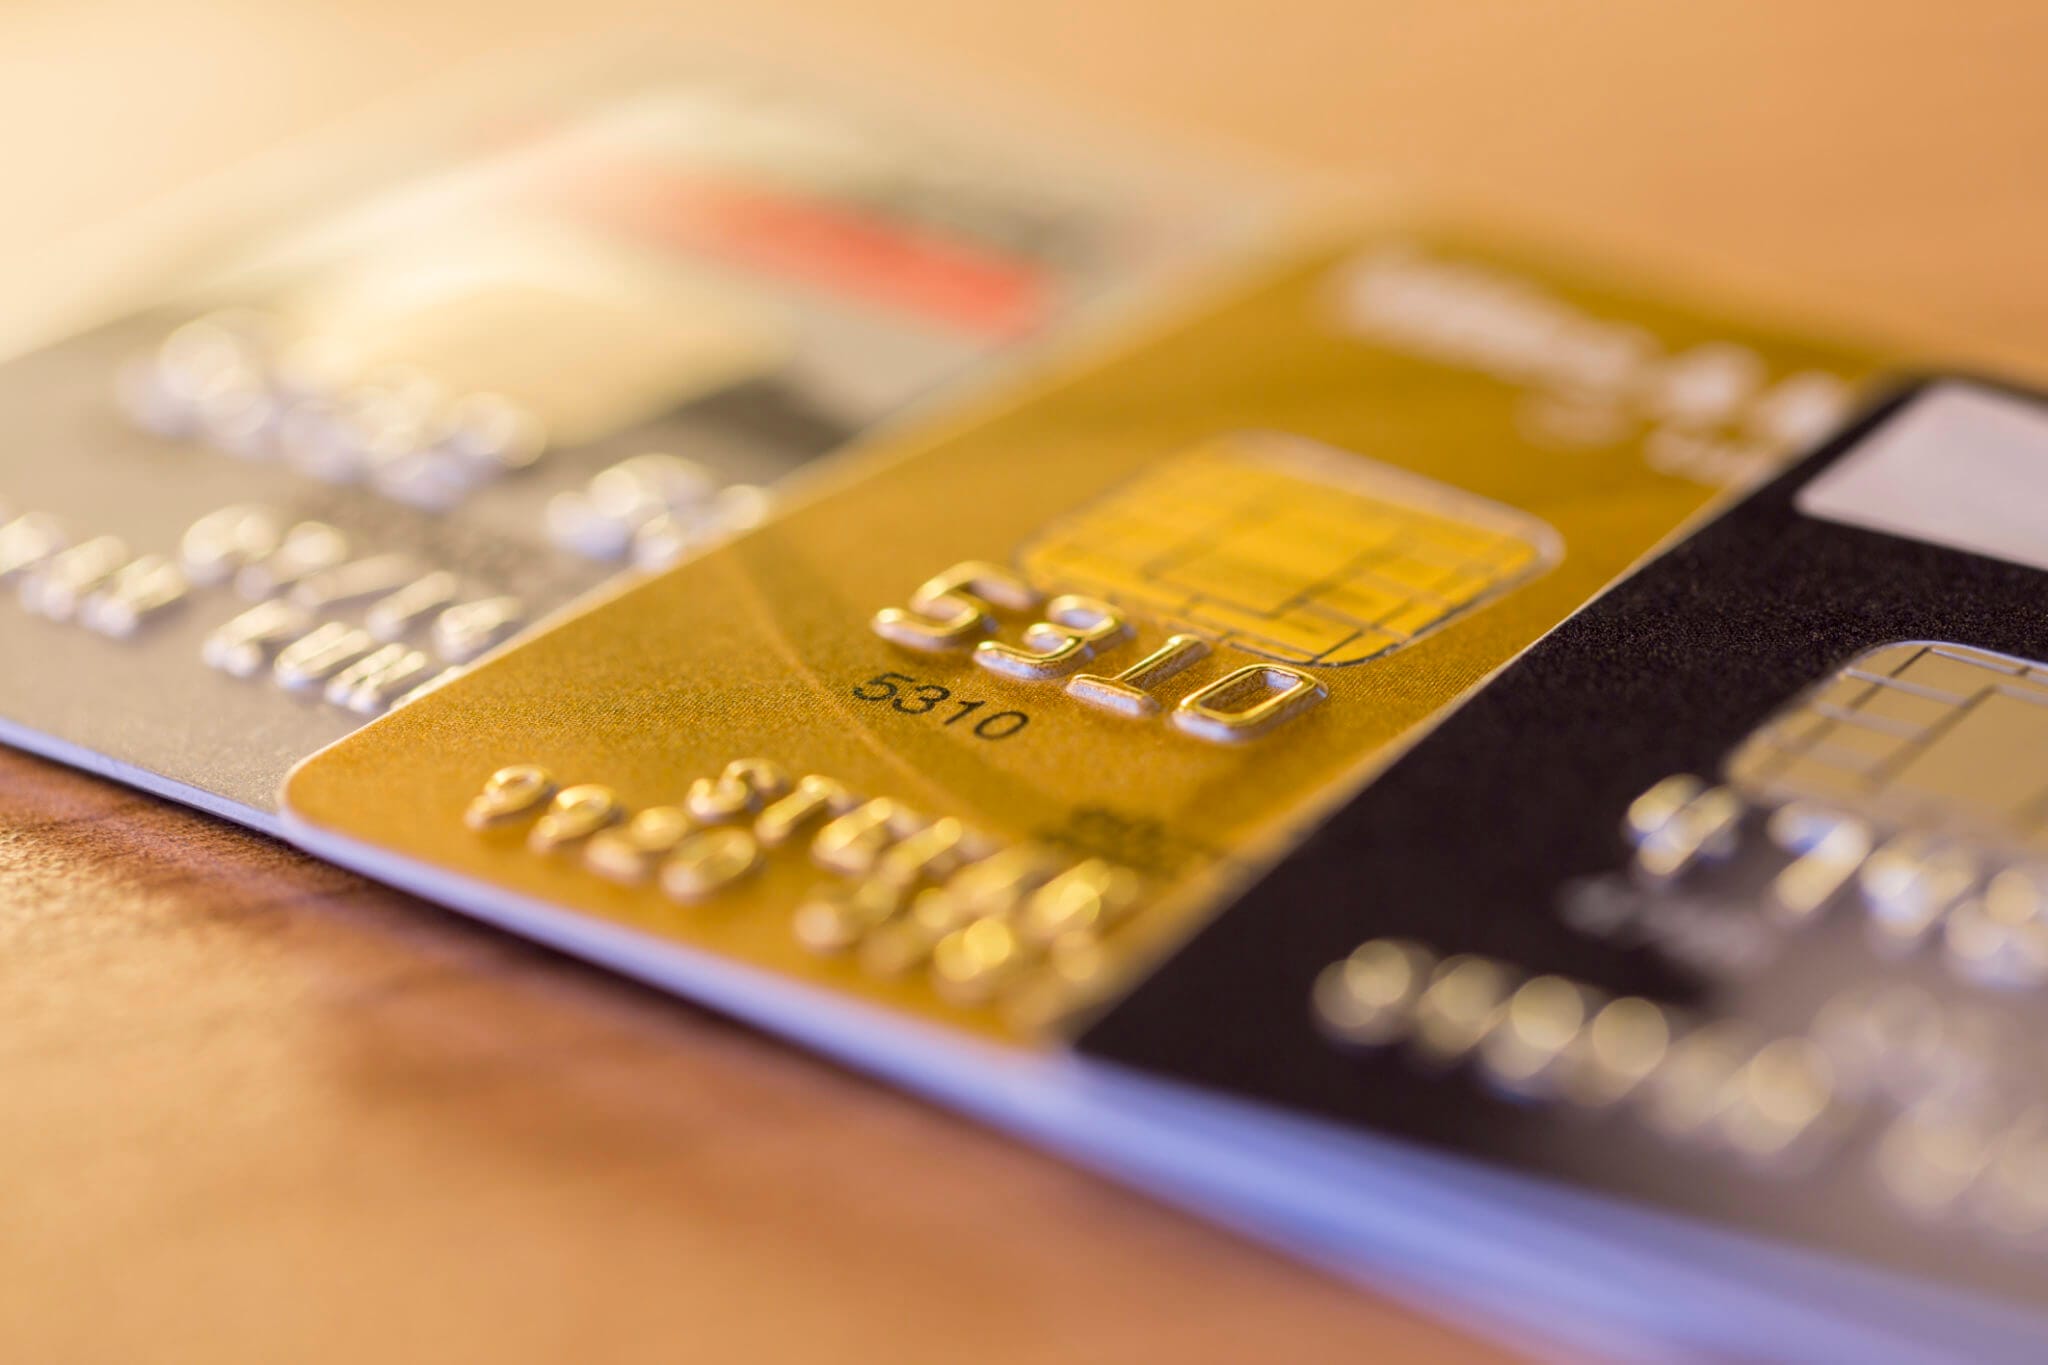 debit-card-vs-credit-card-pros-and-cons-worth-consideringlong-island